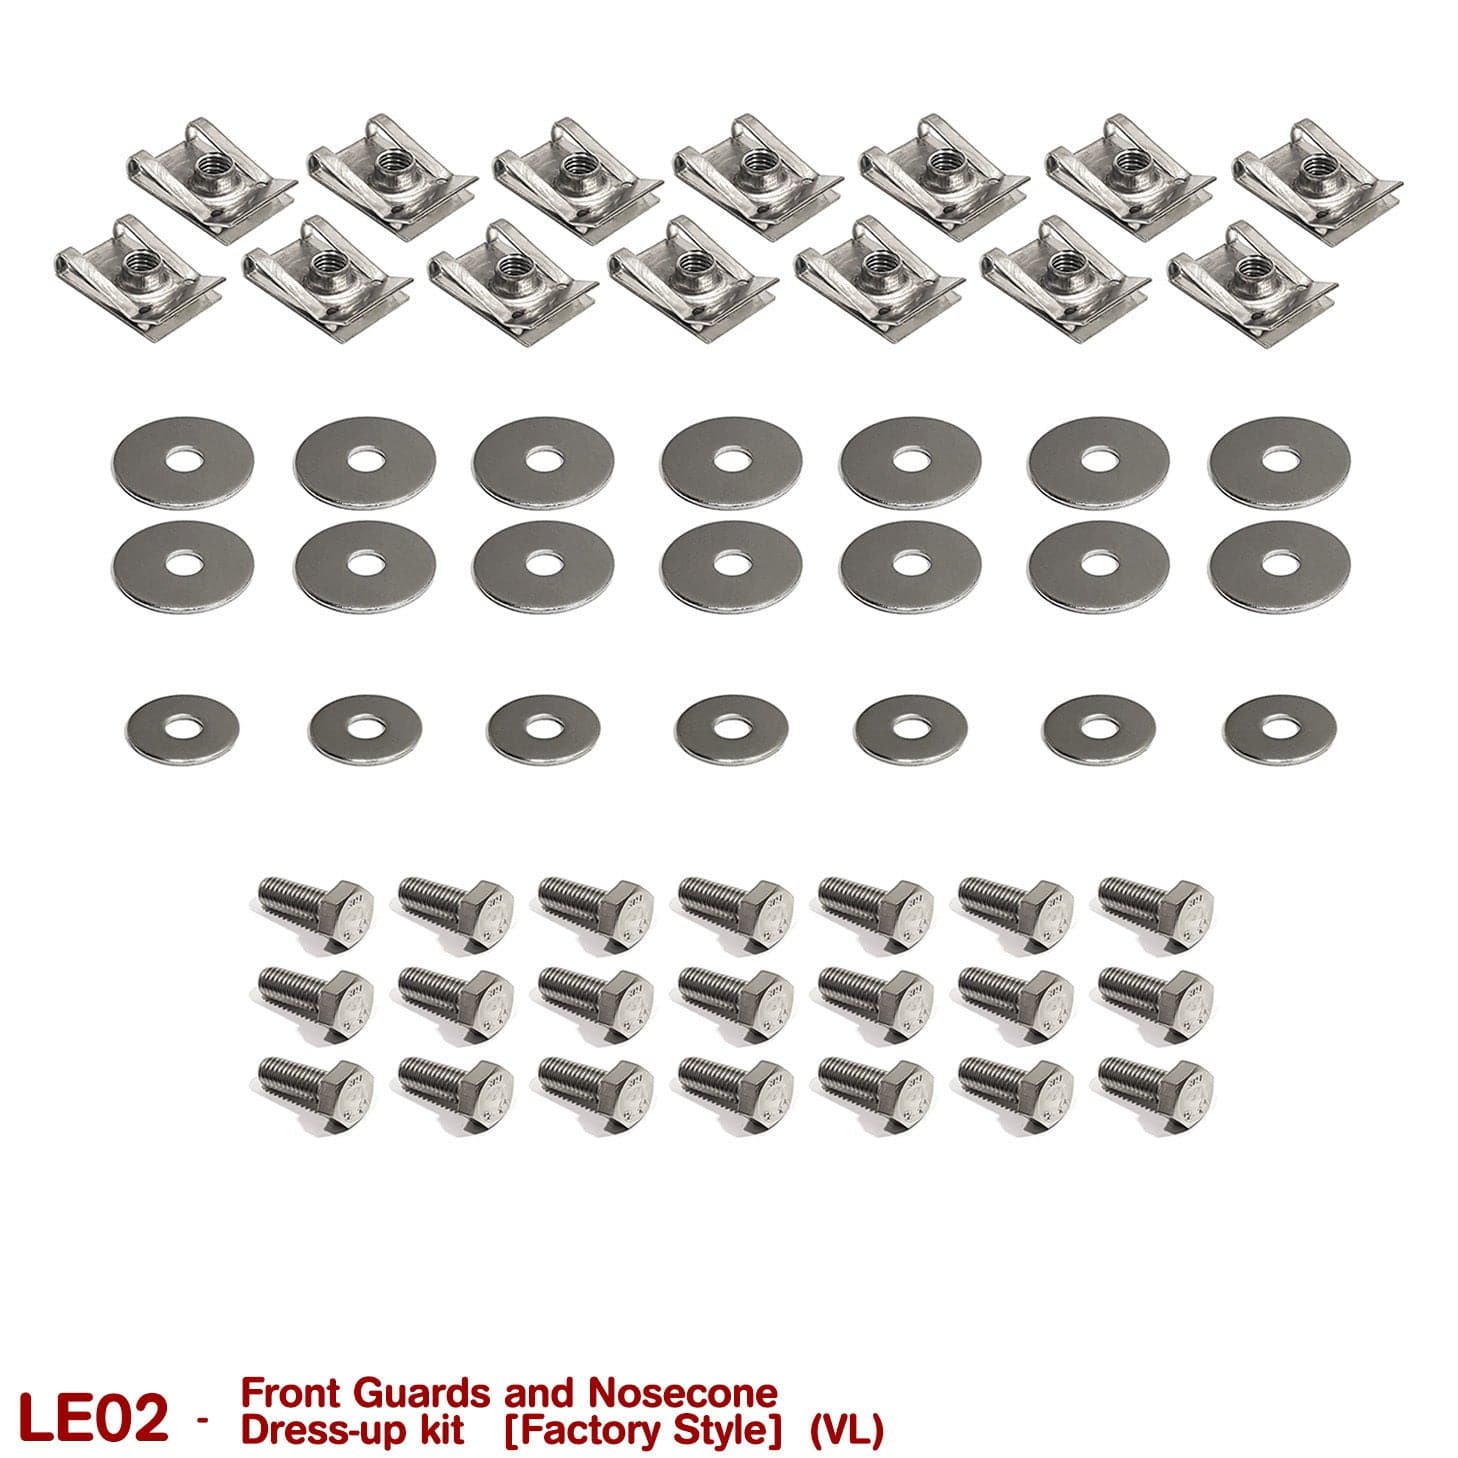 GUARDS and NOSE CONE FASTENER KIT for VL  [FACTORY STYLE]